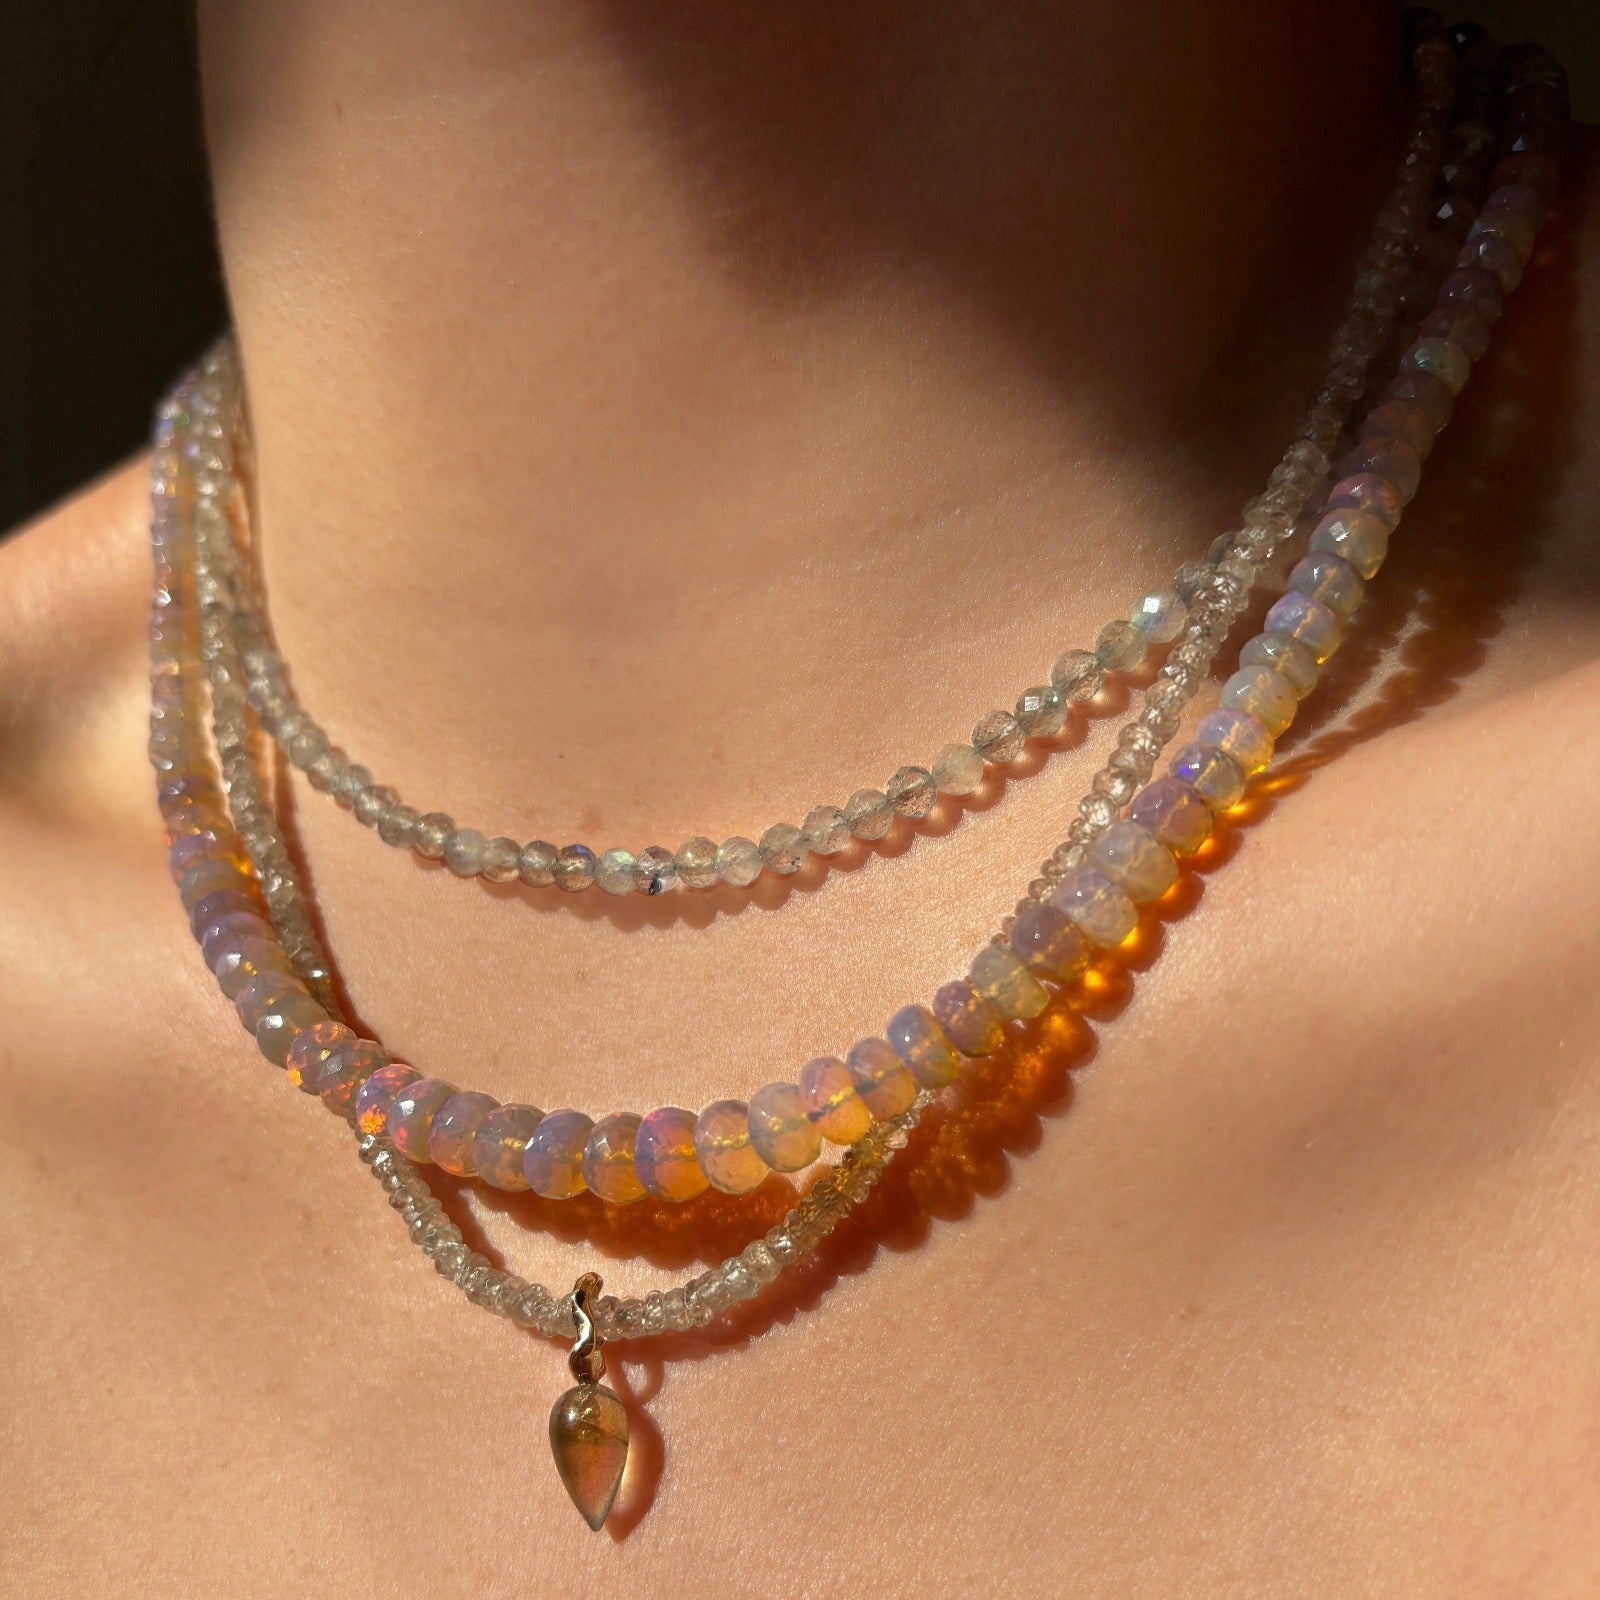 Shimmering beaded necklace made of faceted opals in shades of clear and light lilac on a gold linking ovals clasp. Styled on a neck with an acorn drop charm.